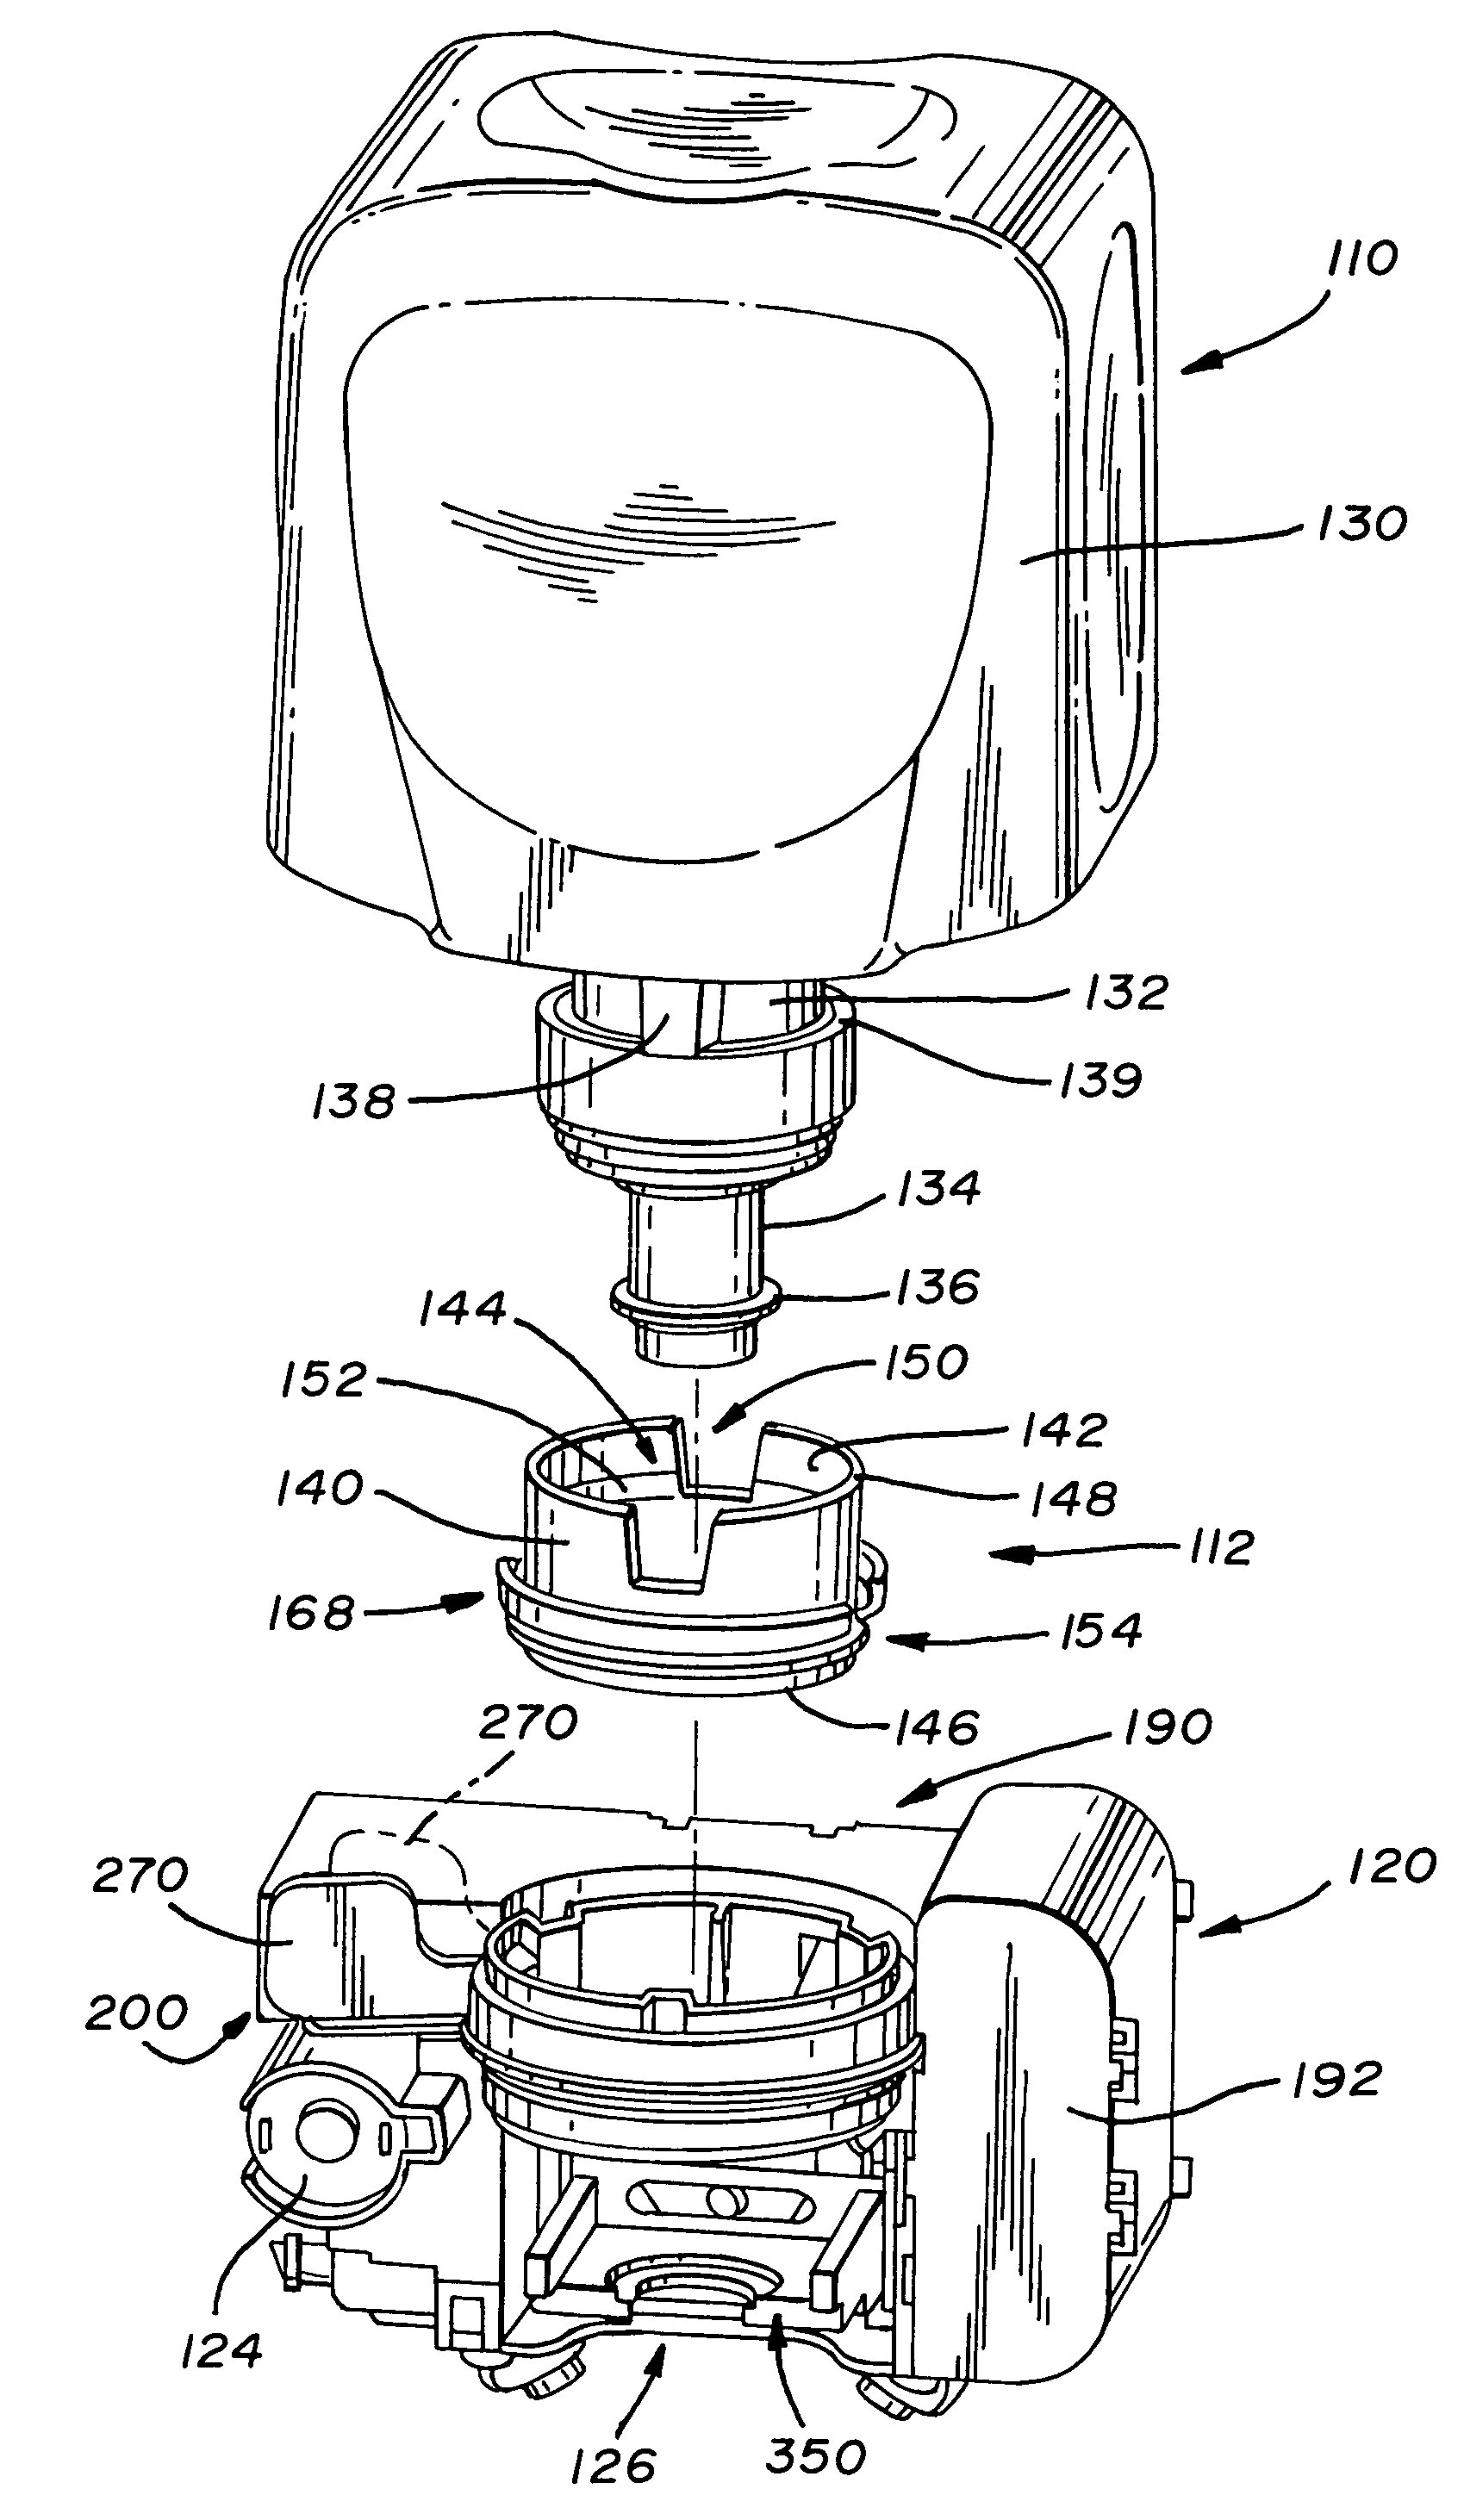 Electronically keyed dispensing systems and related methods utilizing near field frequency response